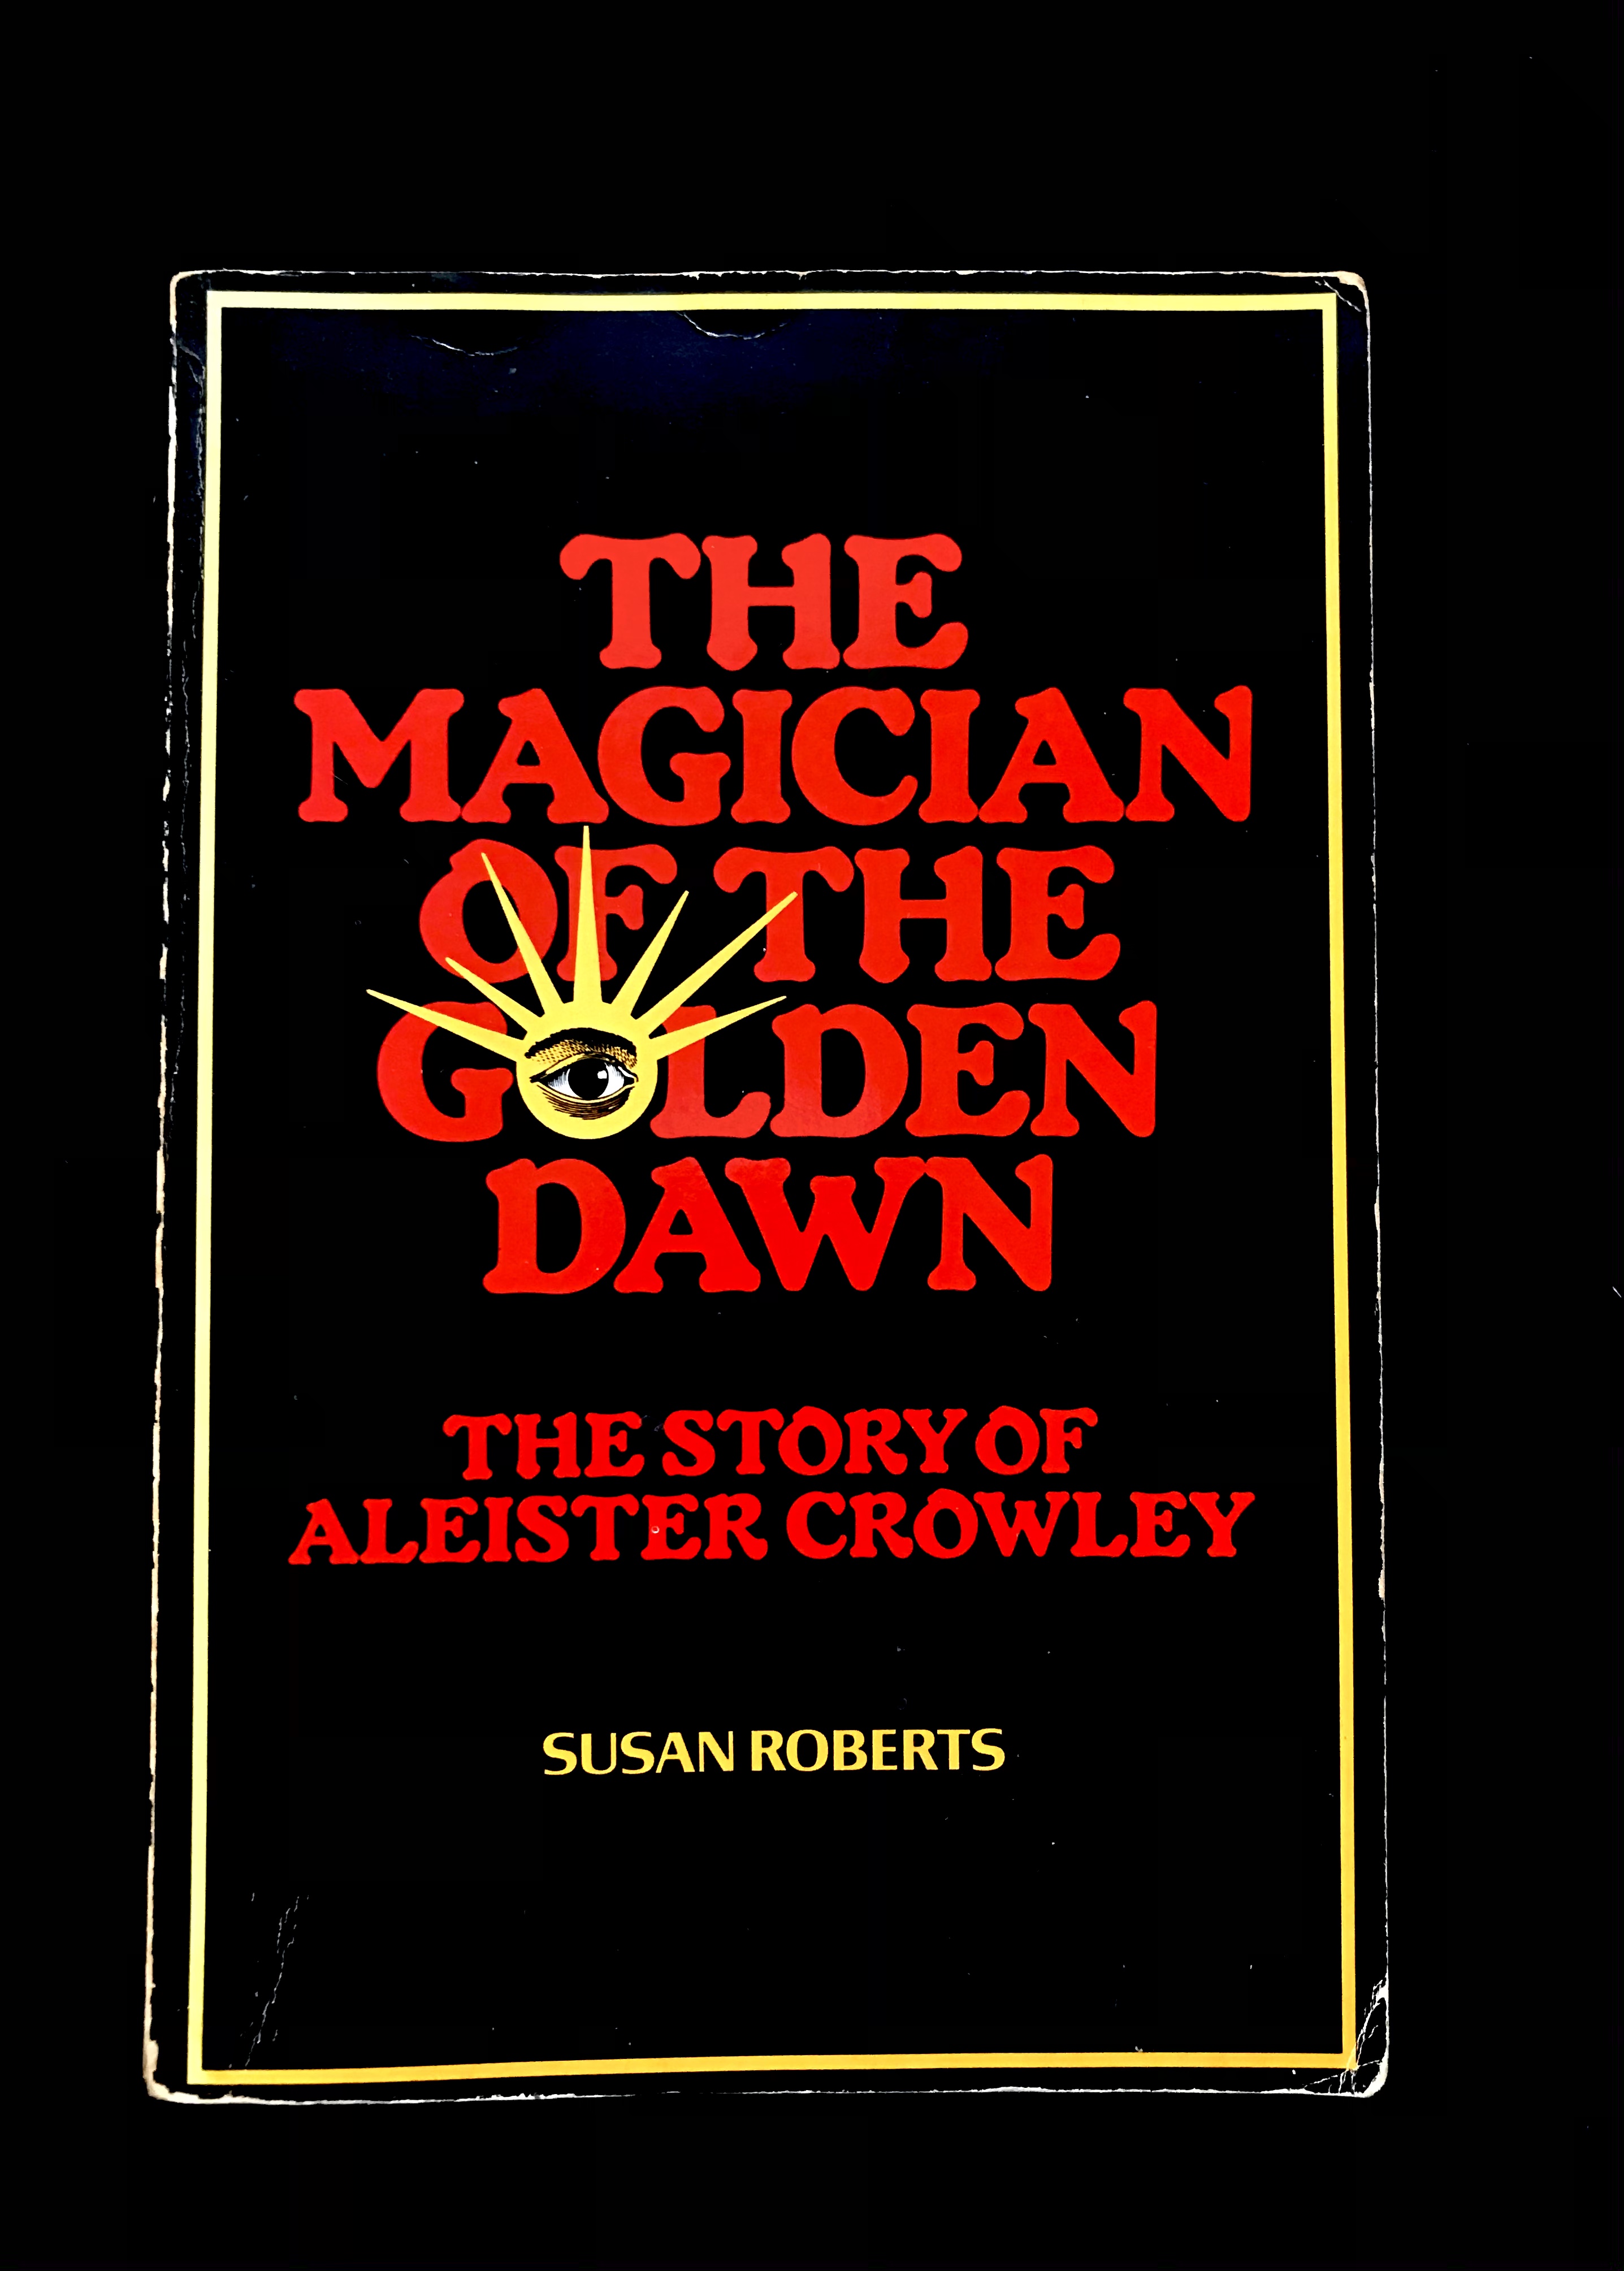 The Magician of the Golden Dawn by Susan Roberts